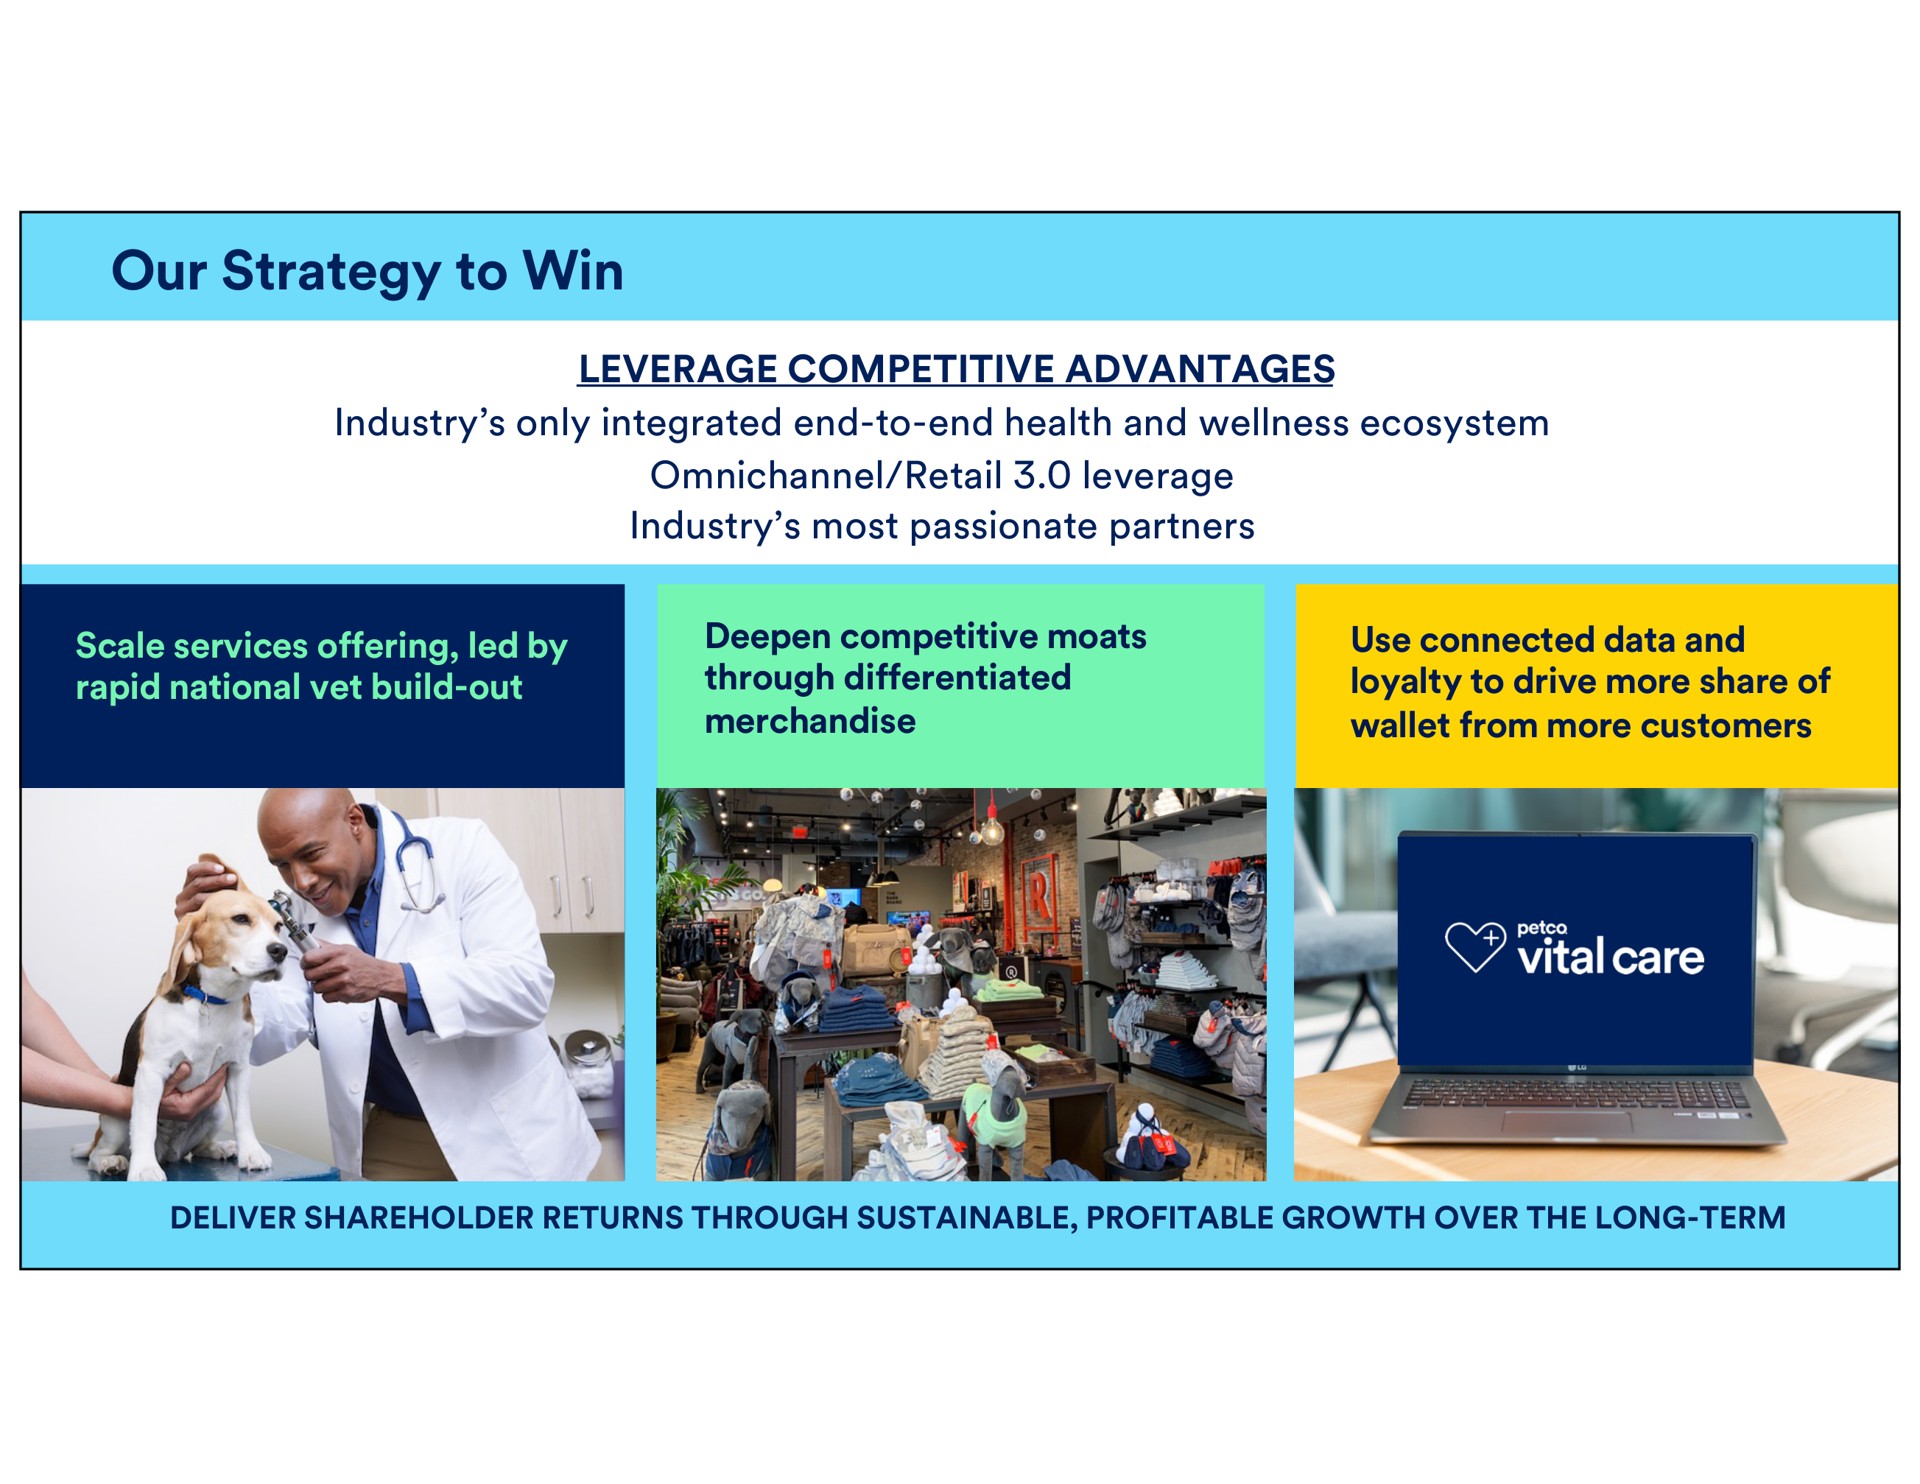 our strategy to win leverage competitive advantages industry only integrated end to end health and wellness ecosystem retail leverage industry most passionate partners scale services offering led by rapid national vet build out deepen competitive moats through differentiated merchandise use connected data and loyalty drive more share of wallet from more customers deliver shareholder returns through sustainable profitable growth over the long term vital care ers | Petco